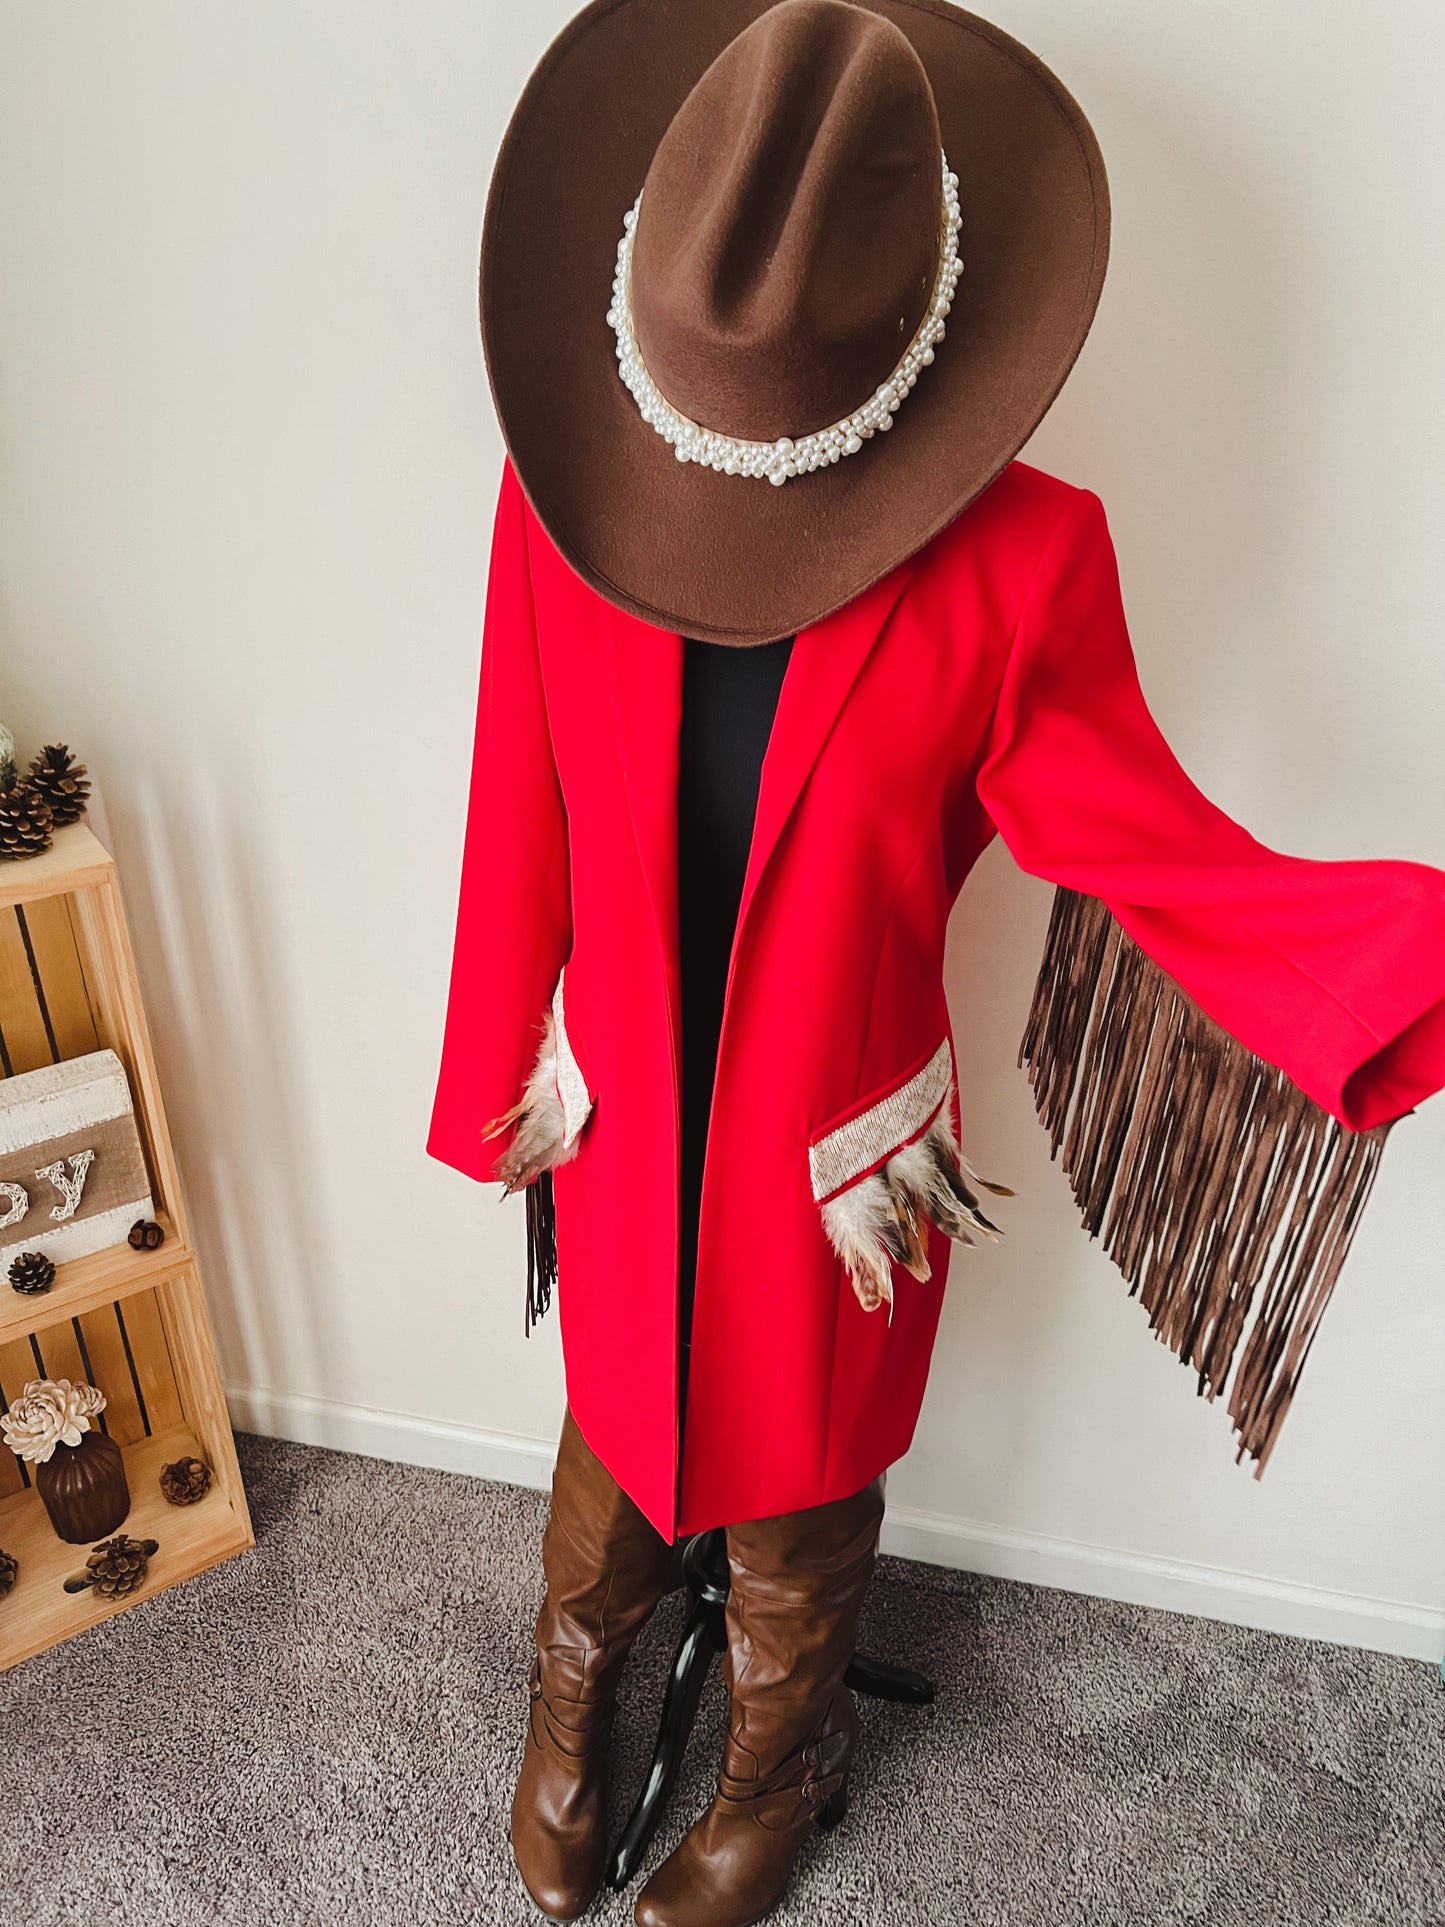 The Lady in Red Coat